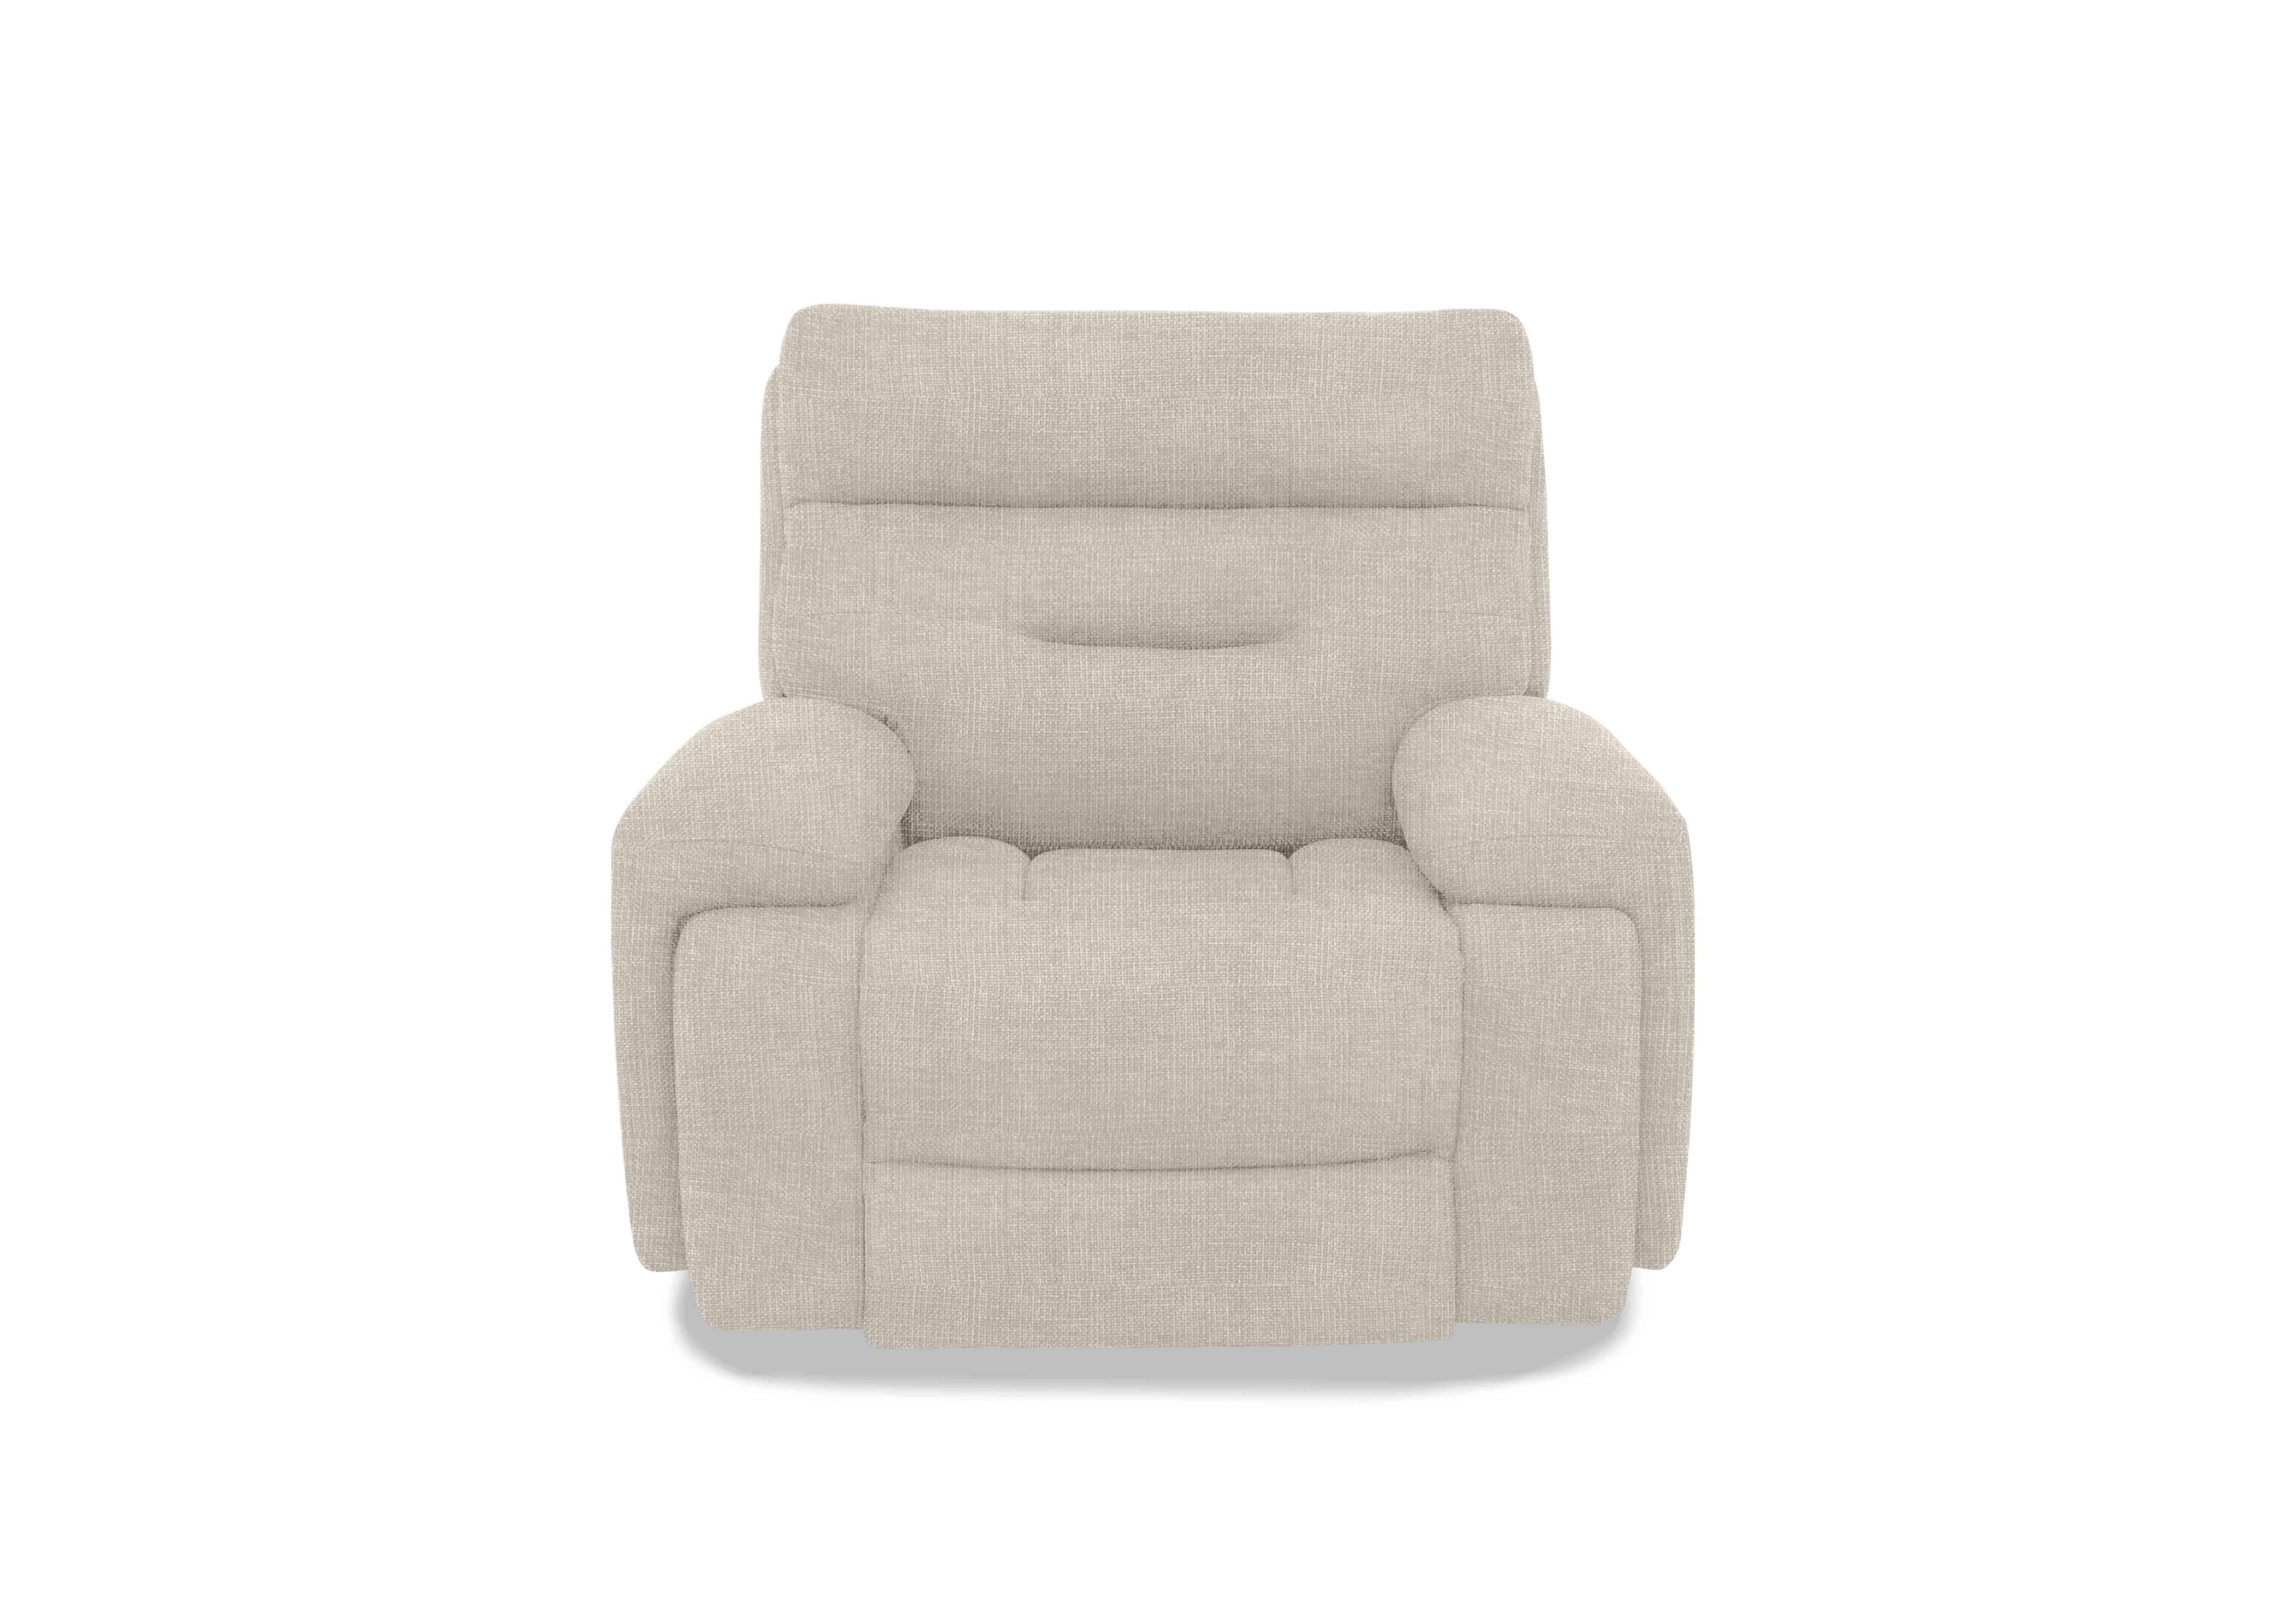 Cinemax Media Fabric Power Recliner Chair with Power Headrest in We-0102  Weave Stone on Furniture Village